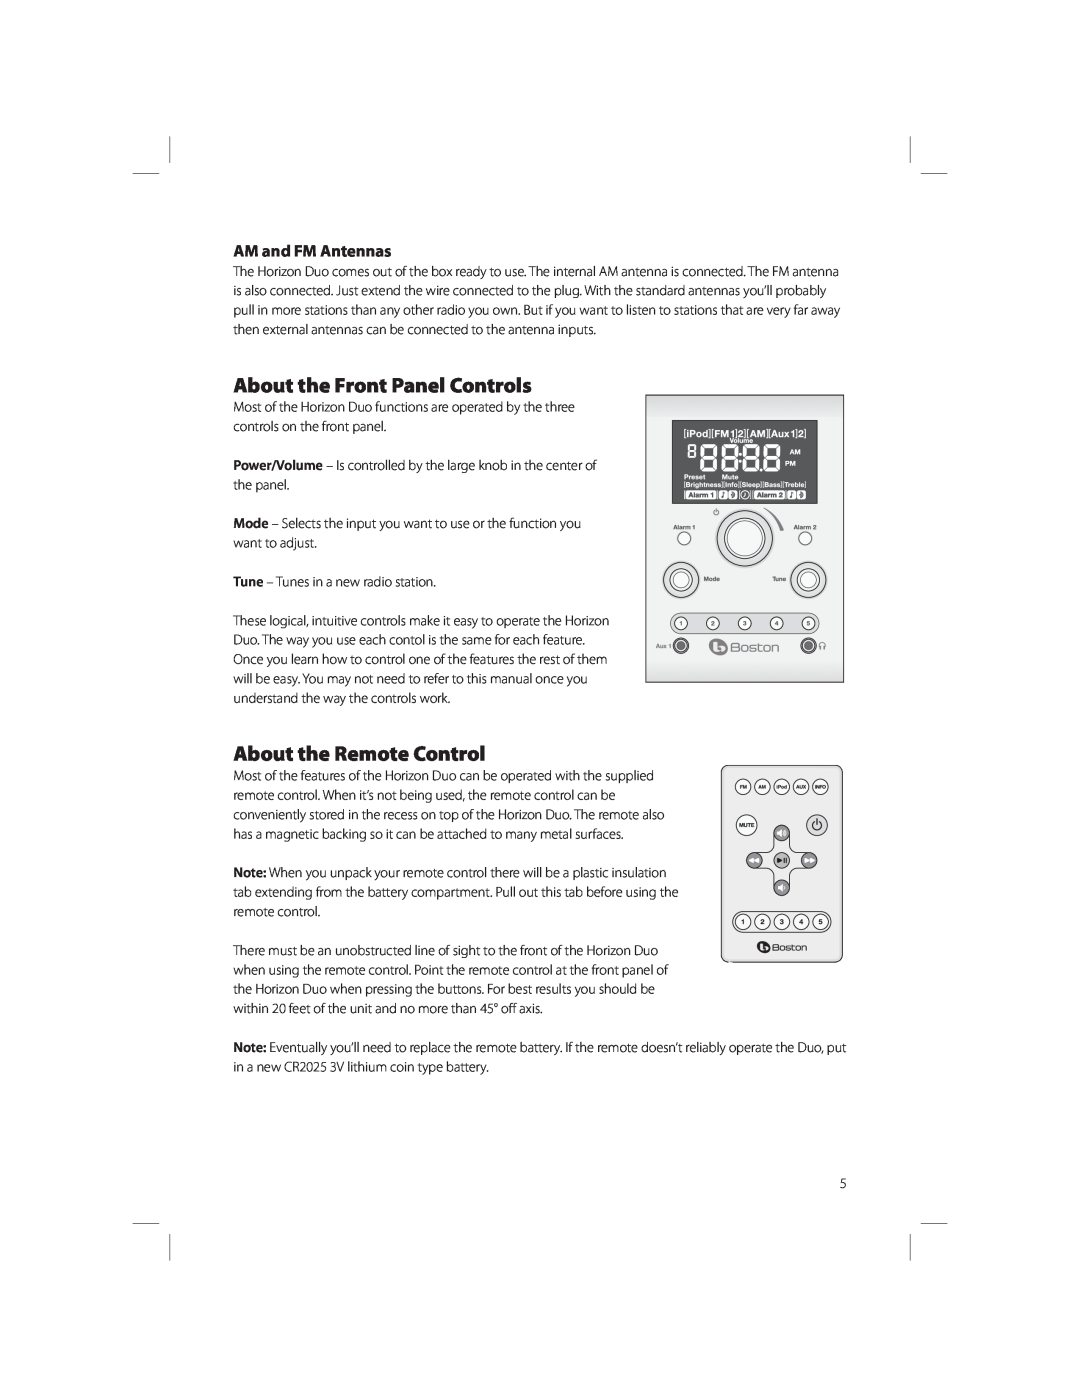 Boston Acoustics AM/FM Radio Tuner About the Front Panel Controls, About the Remote Control, AM and FM Antennas 